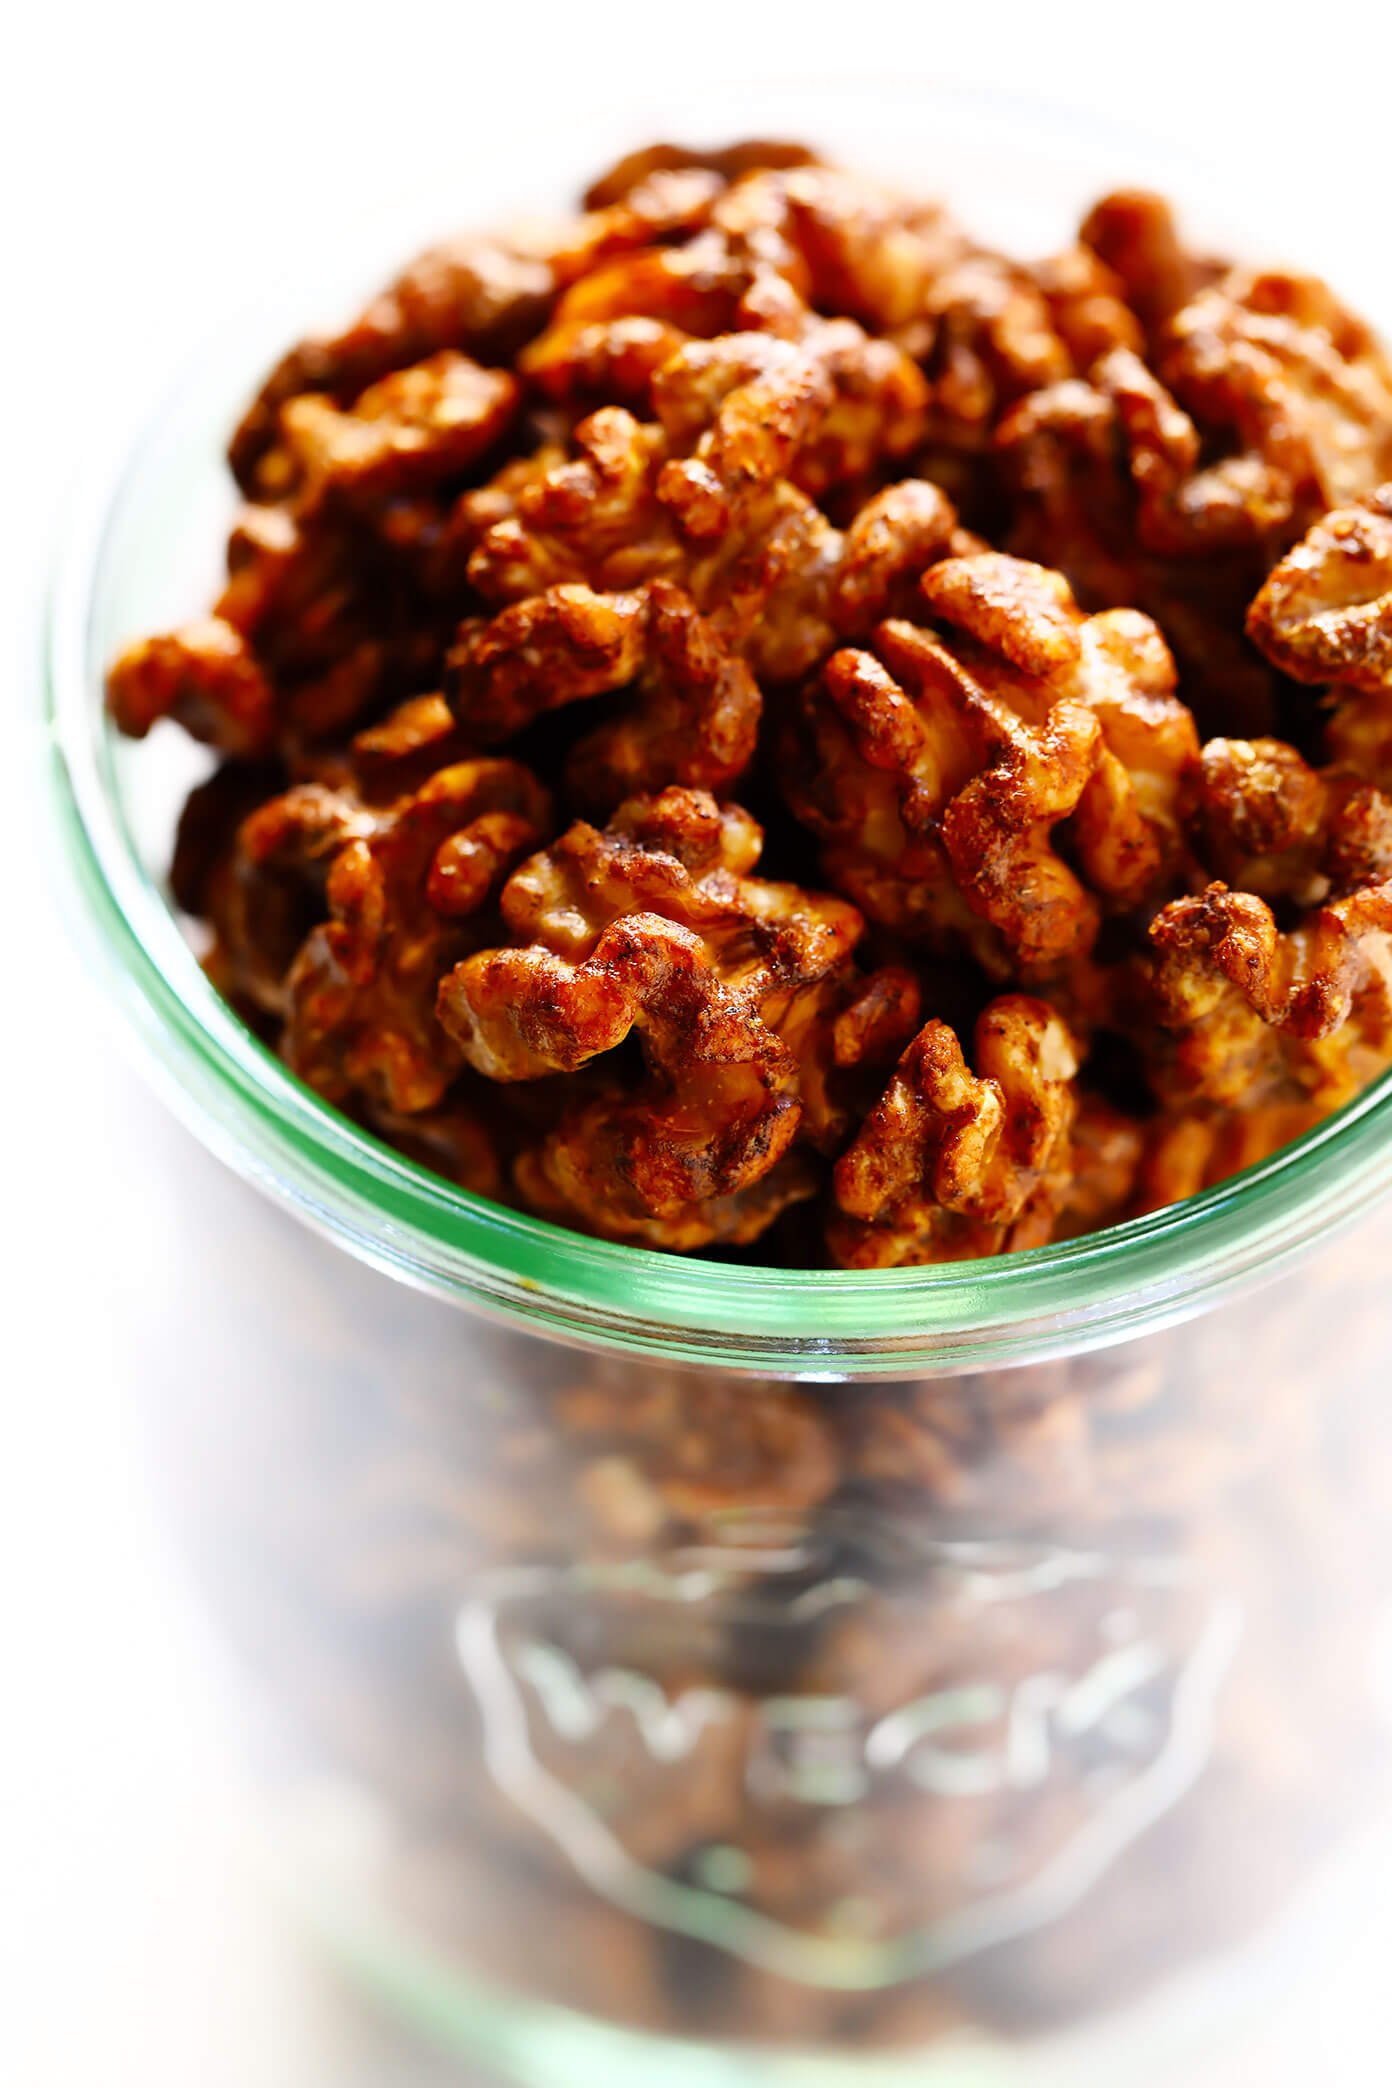 DIY Edible Gift -- Candied Nuts (Walnuts or Pecans)